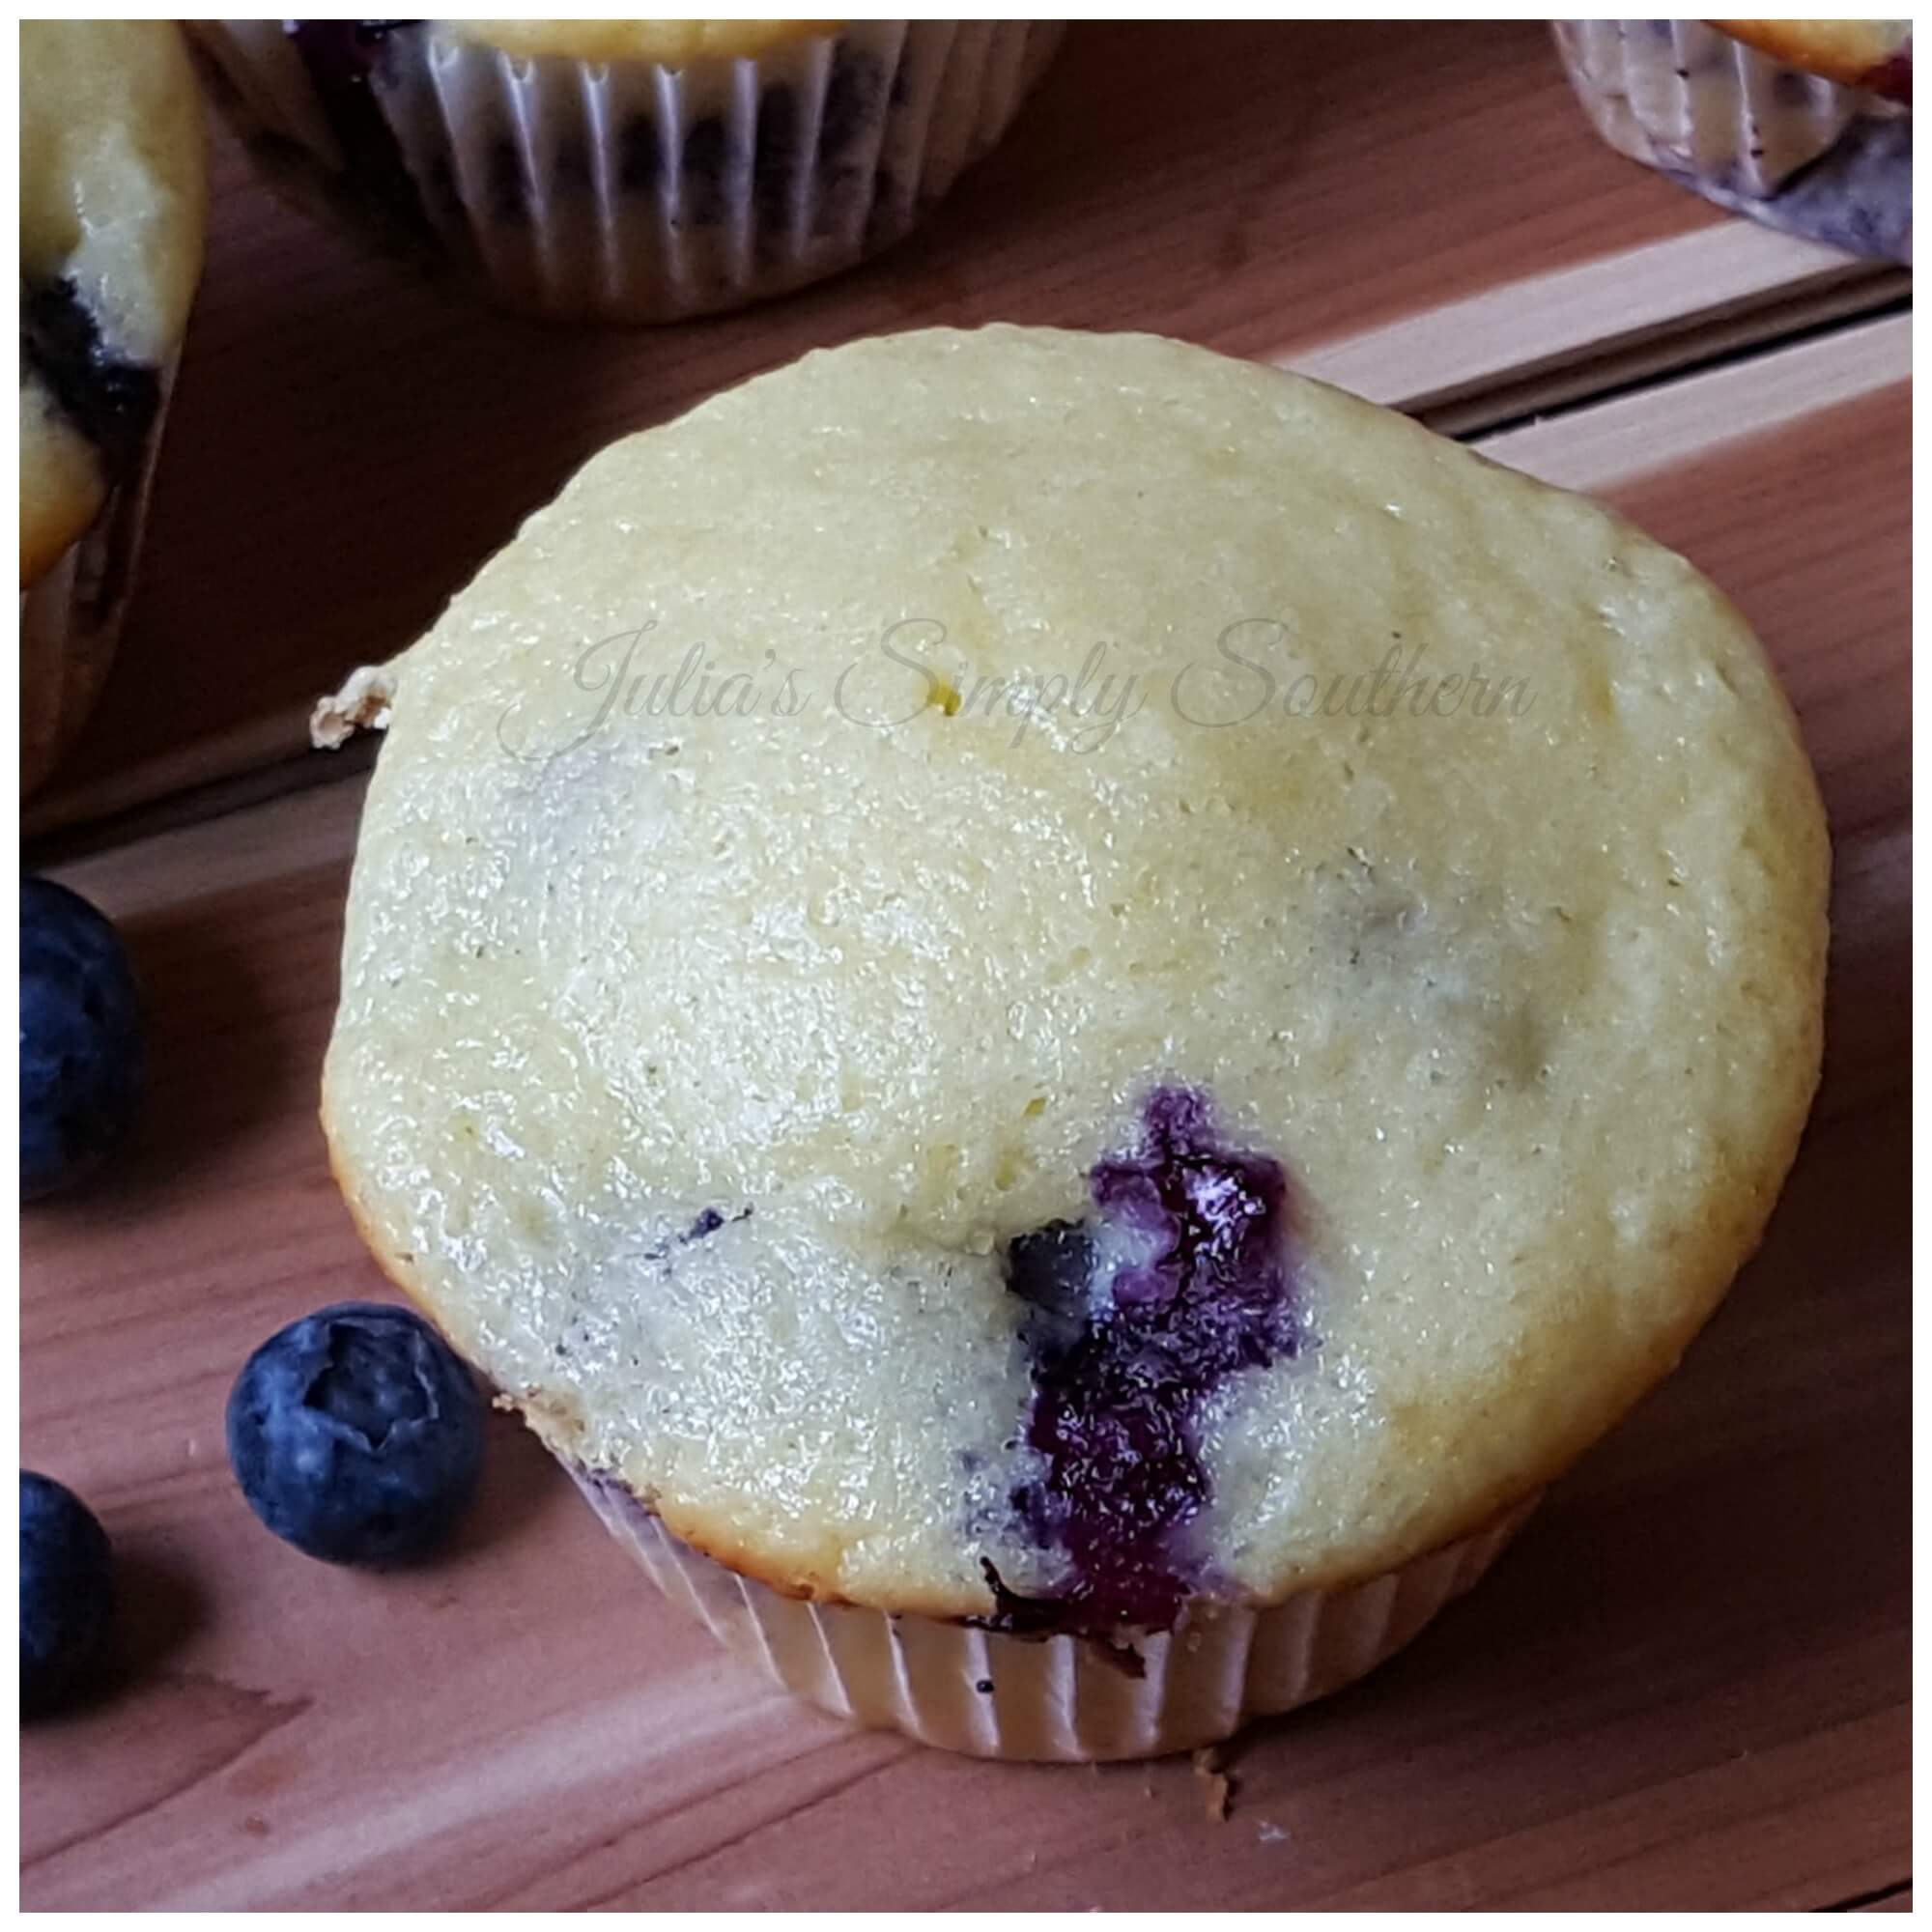 Buttermilk Blueberry Muffins on a wooden table